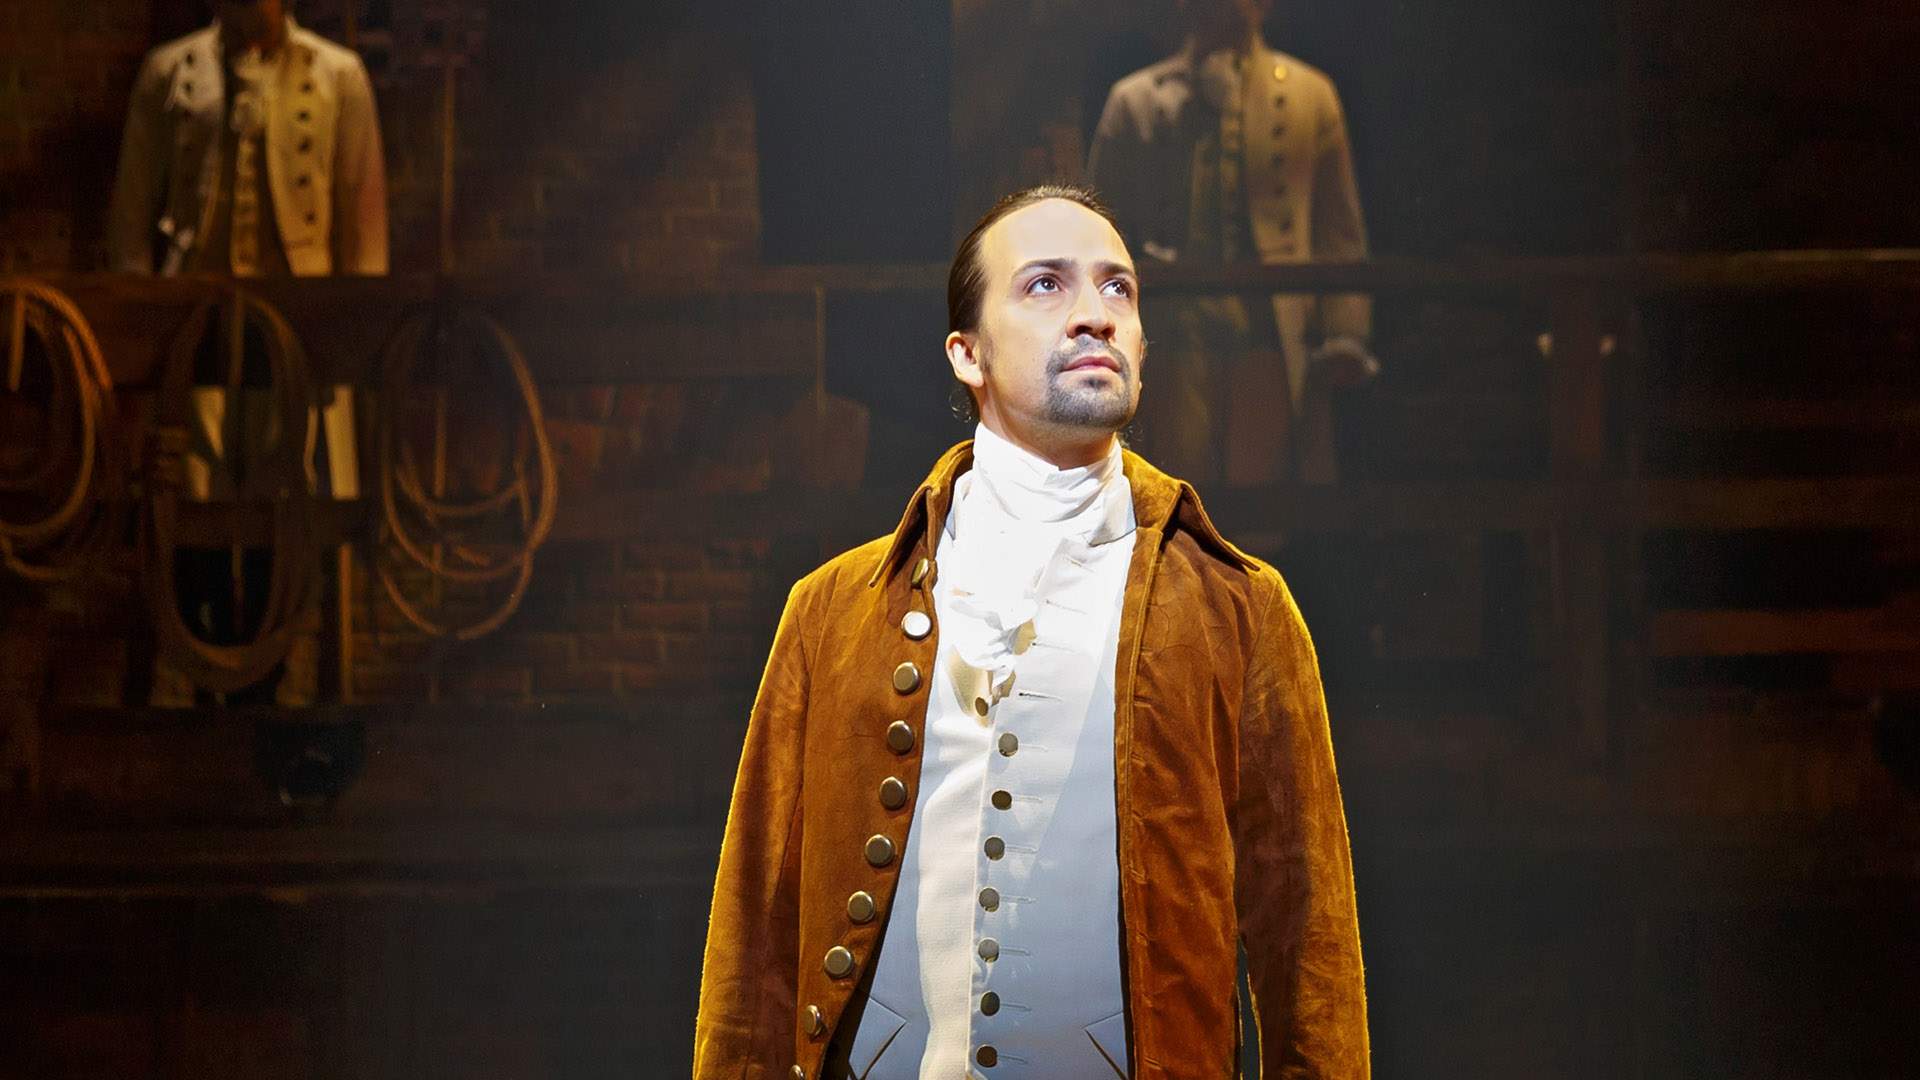 You'll Be Able to Watch Lin-Manuel Miranda's Brisbane 'Hamilton' Q&A on the ABC and iView This Month